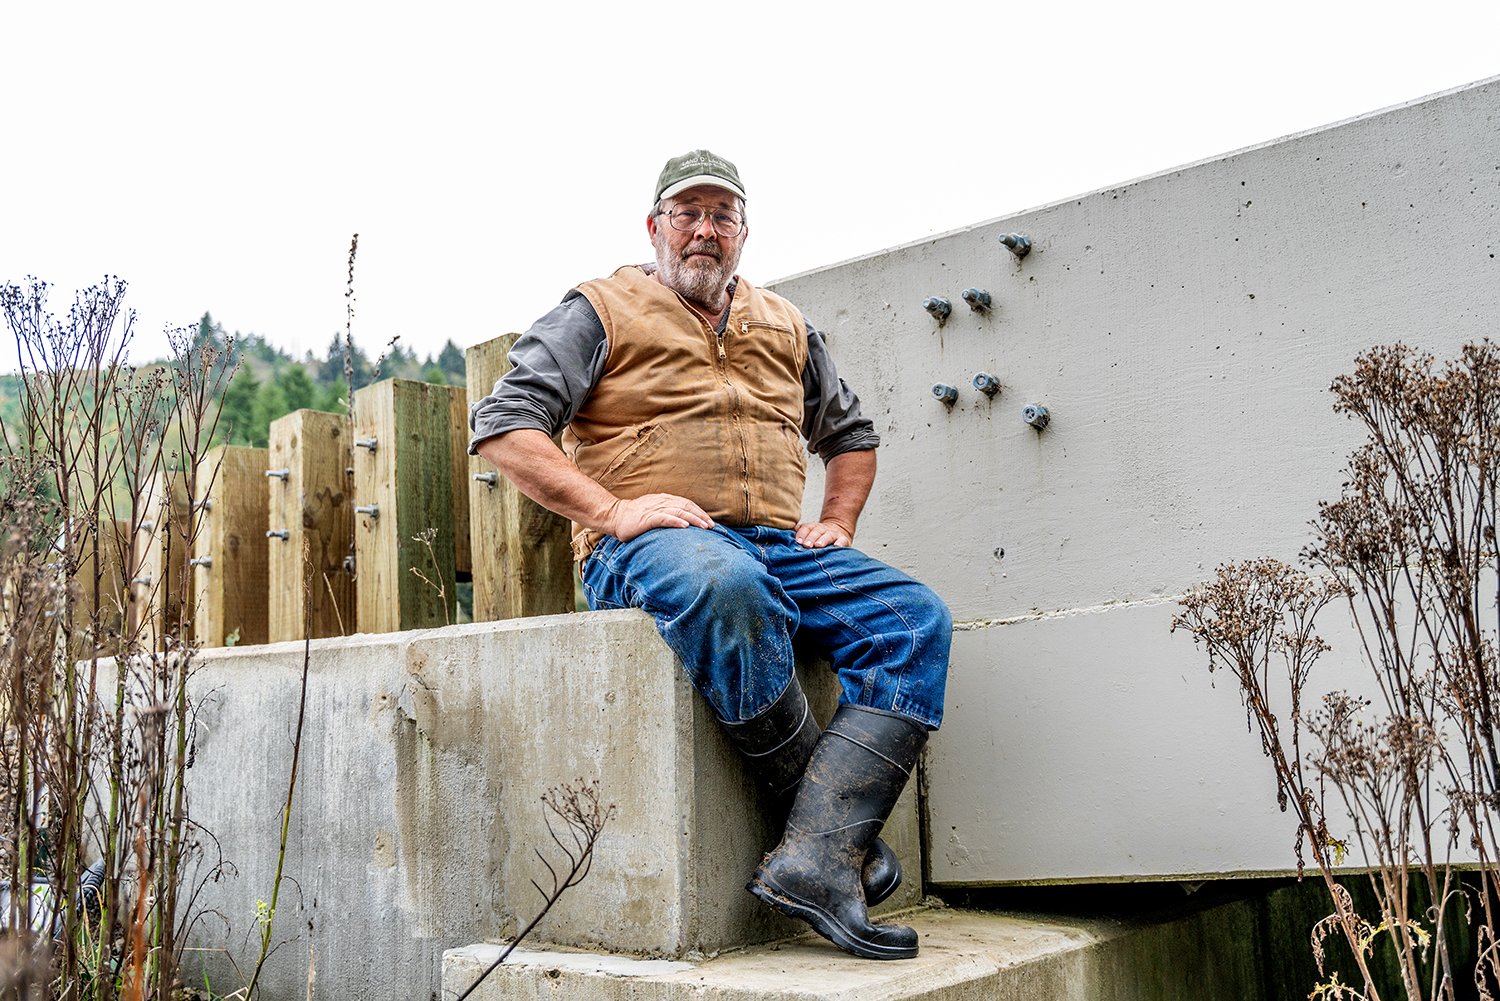  “When I was a kid, there was a lot of fish in these creeks. There was even fish in this creek right here [Clear Creek]. And they’re just not there anymore. They’re coming back. Like one guy from DSL told me, if you build it, they’ll come. If you fix